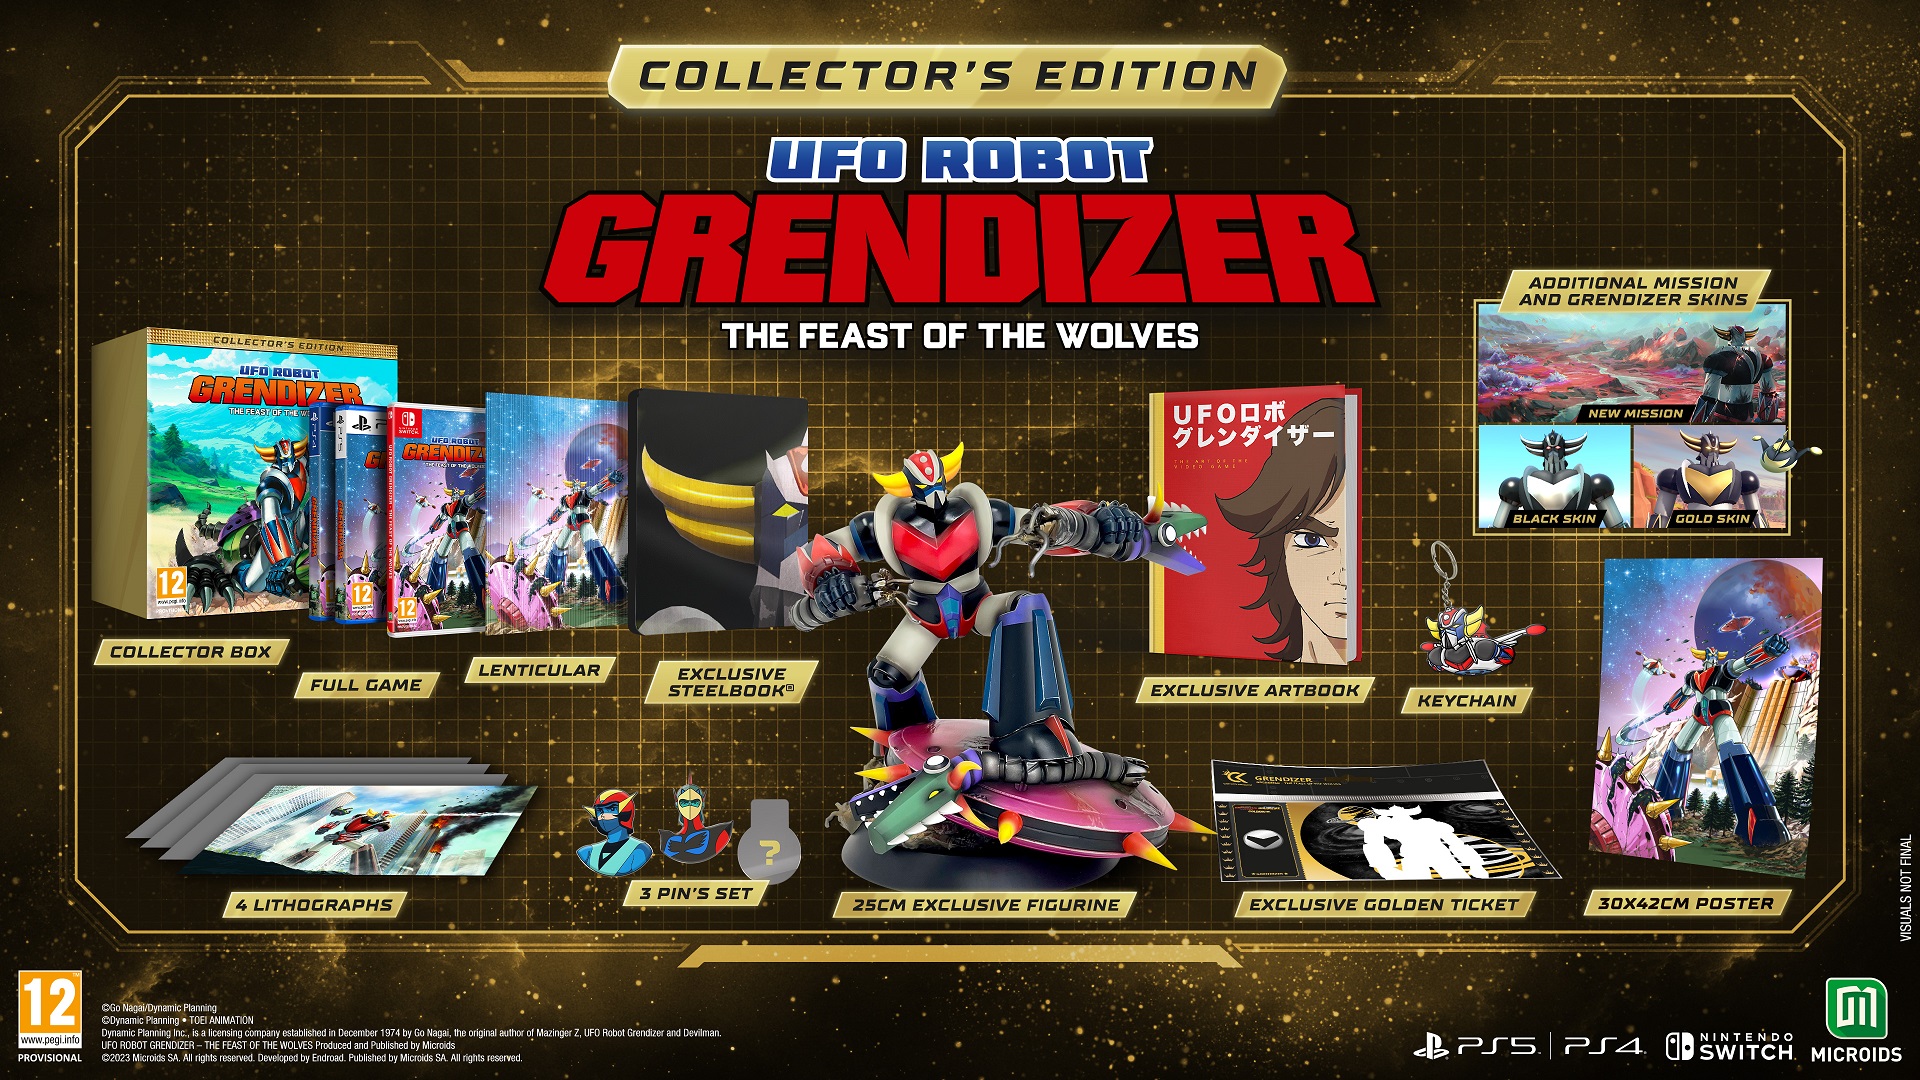 UFO Robot Grendizer: The Feast Of The Wolves - Collector's Edition